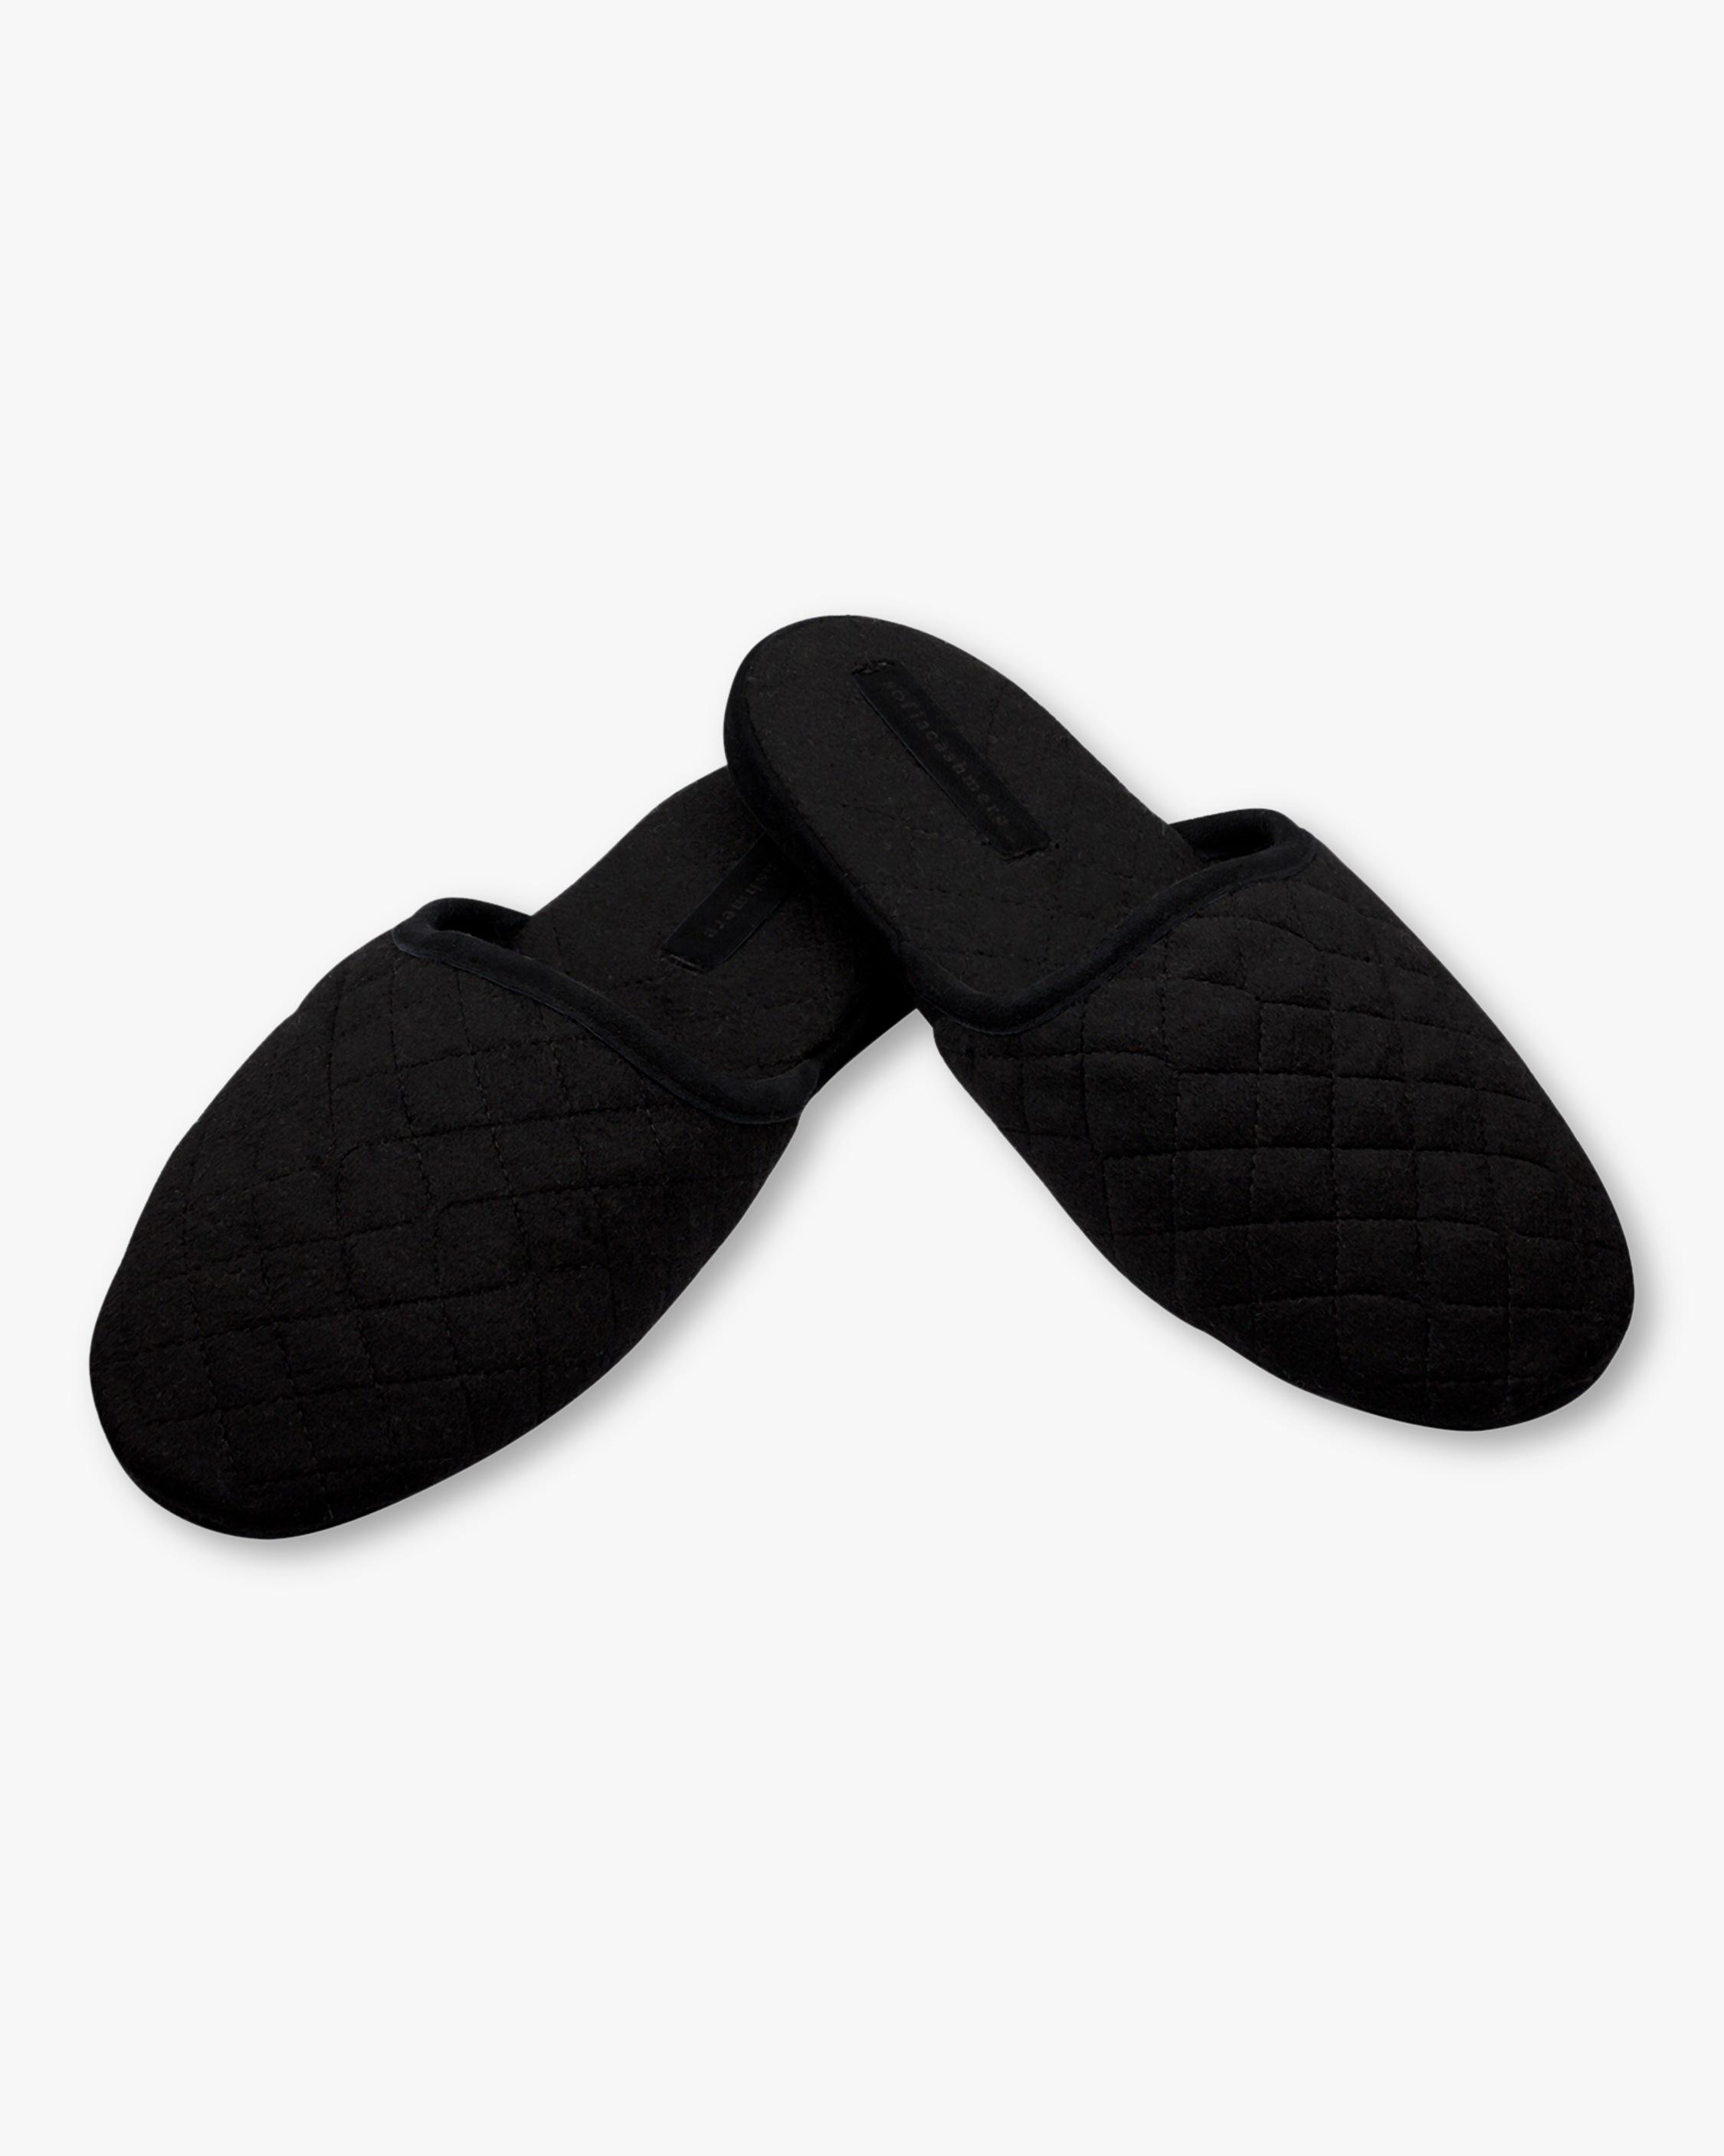 Sofia Cashmere Suede Trim Quilted Cashmere Slippers in Black, Pink ...